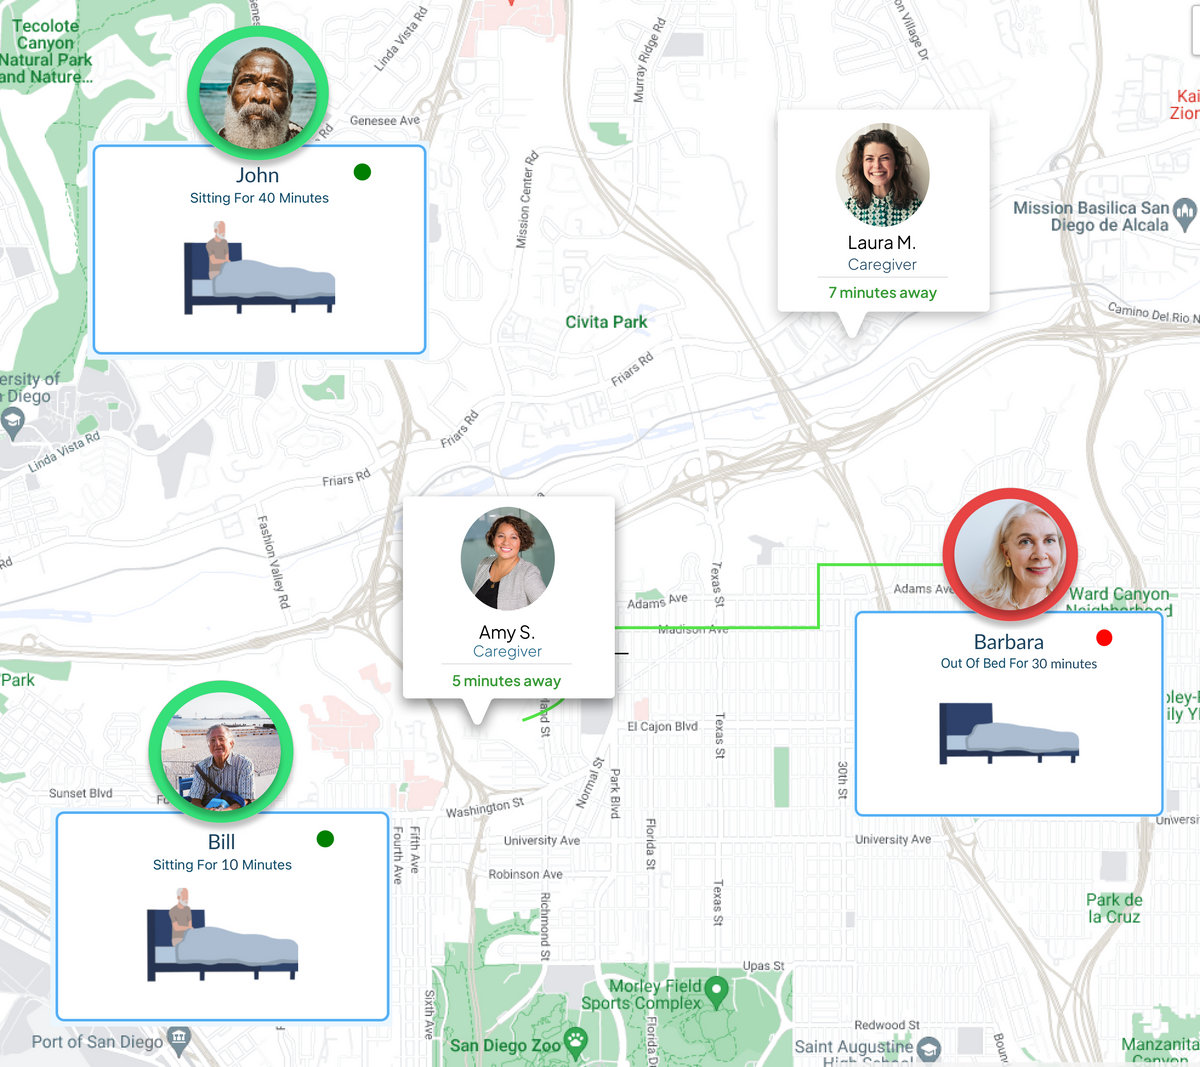 Map with connecting loved ones with caregivers